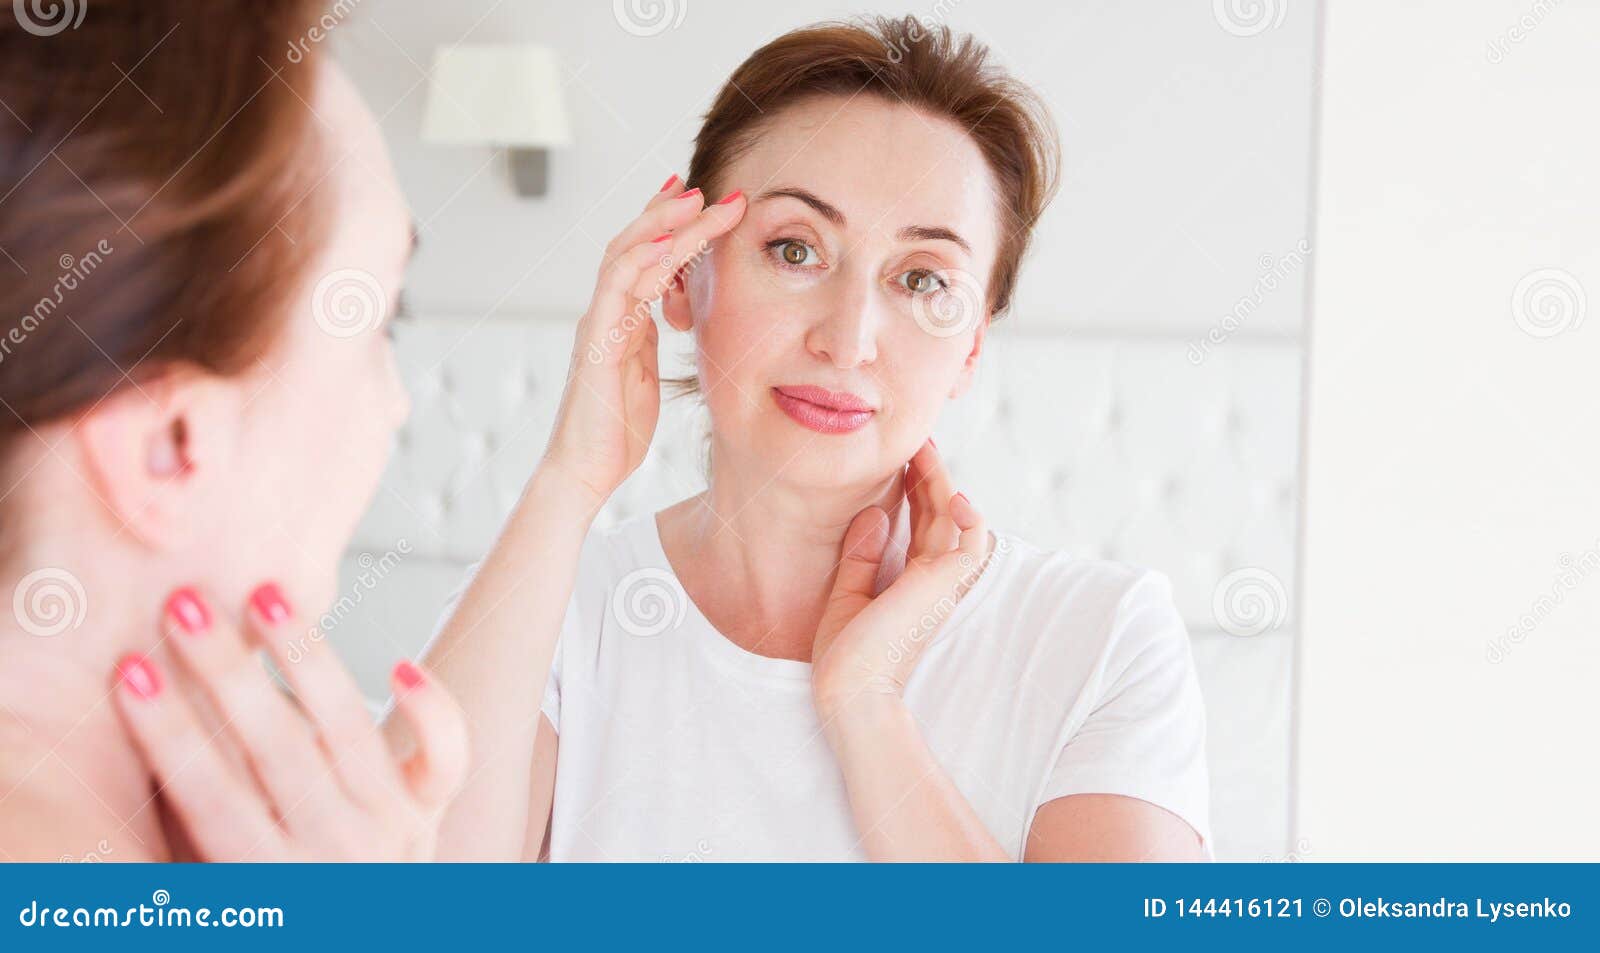 Middle Age Woman Looking in Mirror on Wrinkle Face on Forehead ...